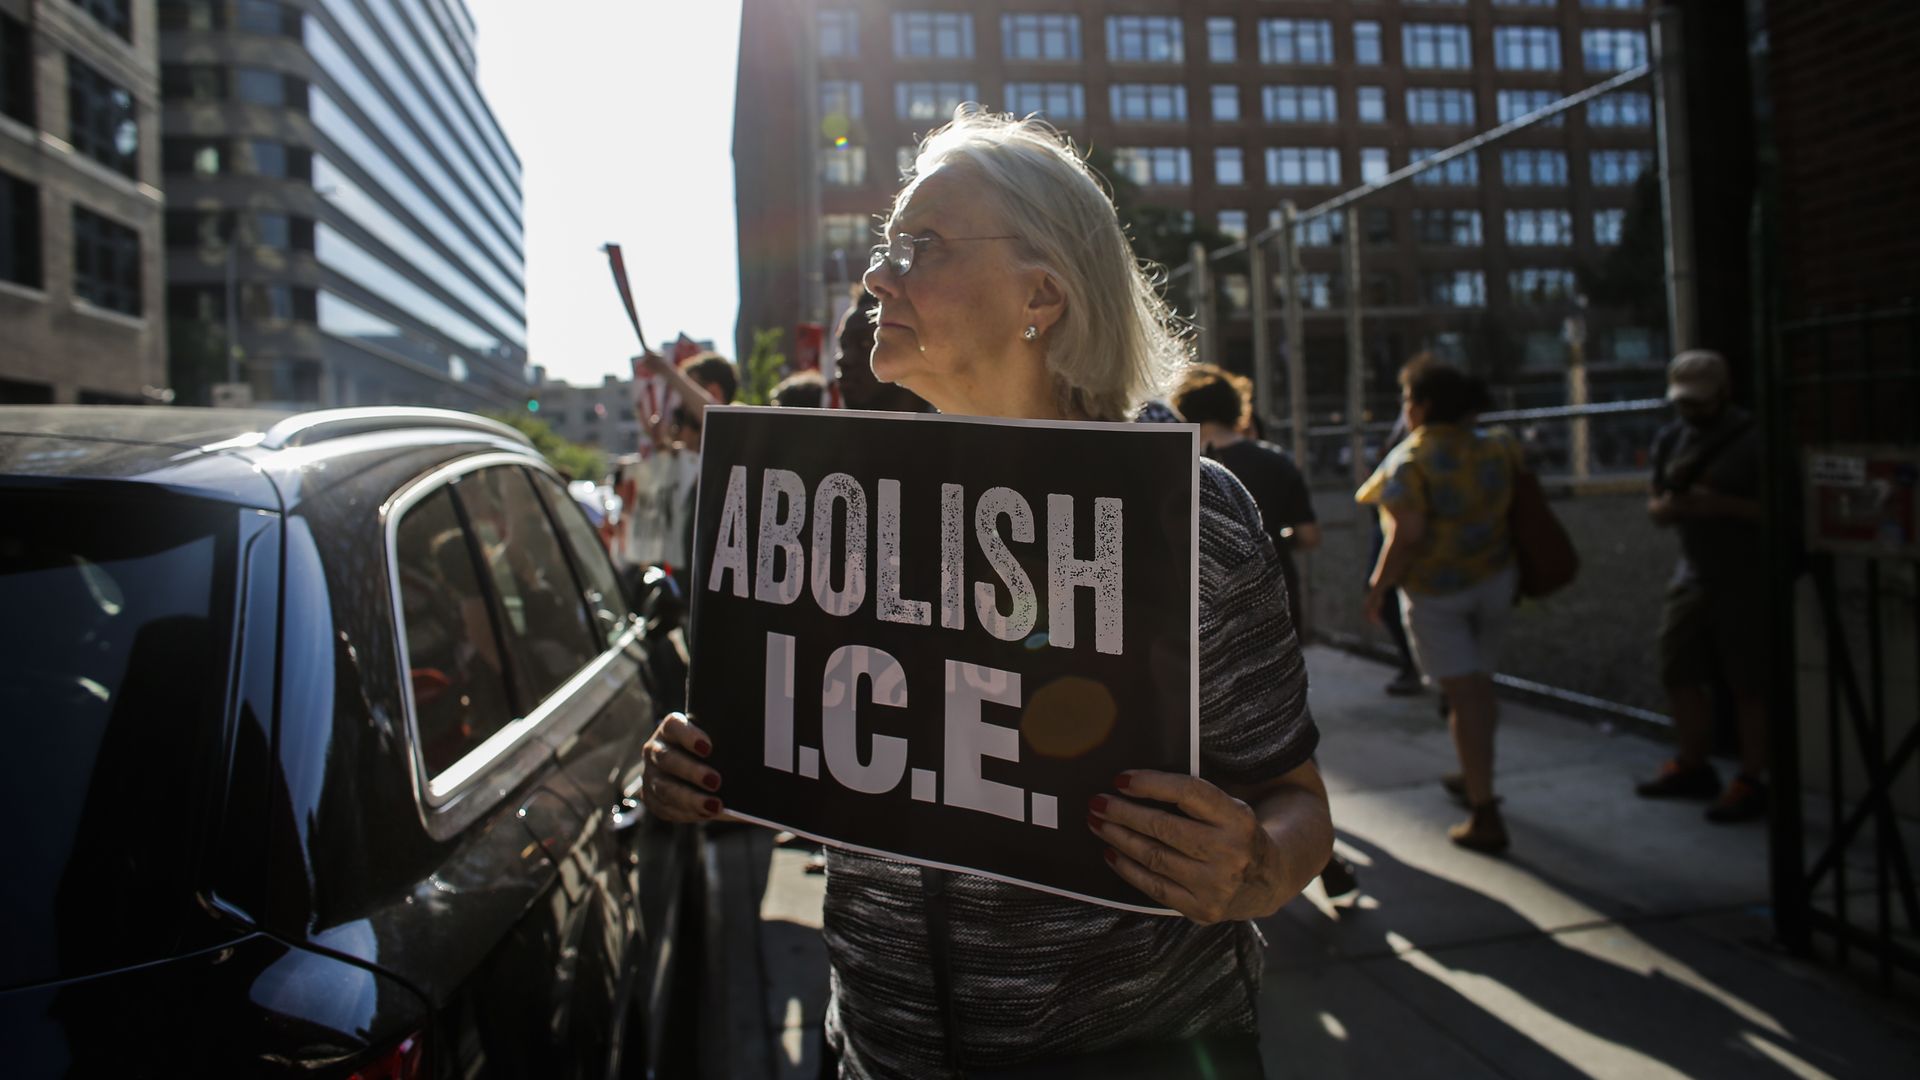 A woman holds a sign in protest, reading "Abolish I.C.E."